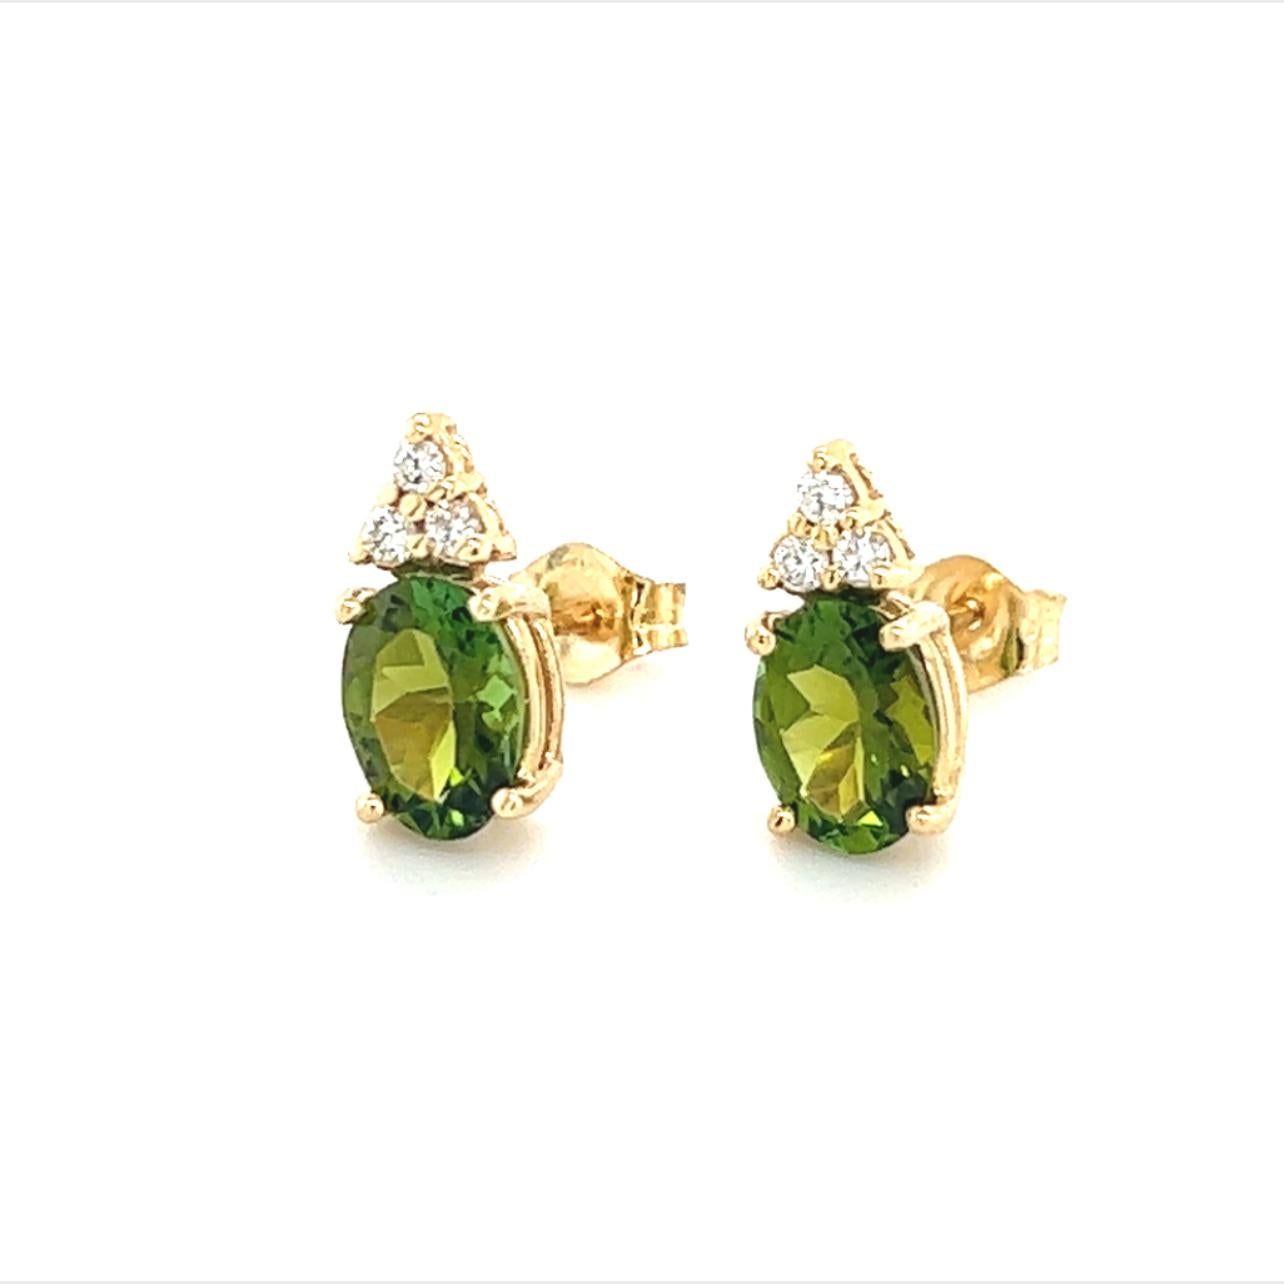 Natural Tourmaline Diamond Earrings 14k Gold 1.87 TCW Certified In New Condition For Sale In Brooklyn, NY